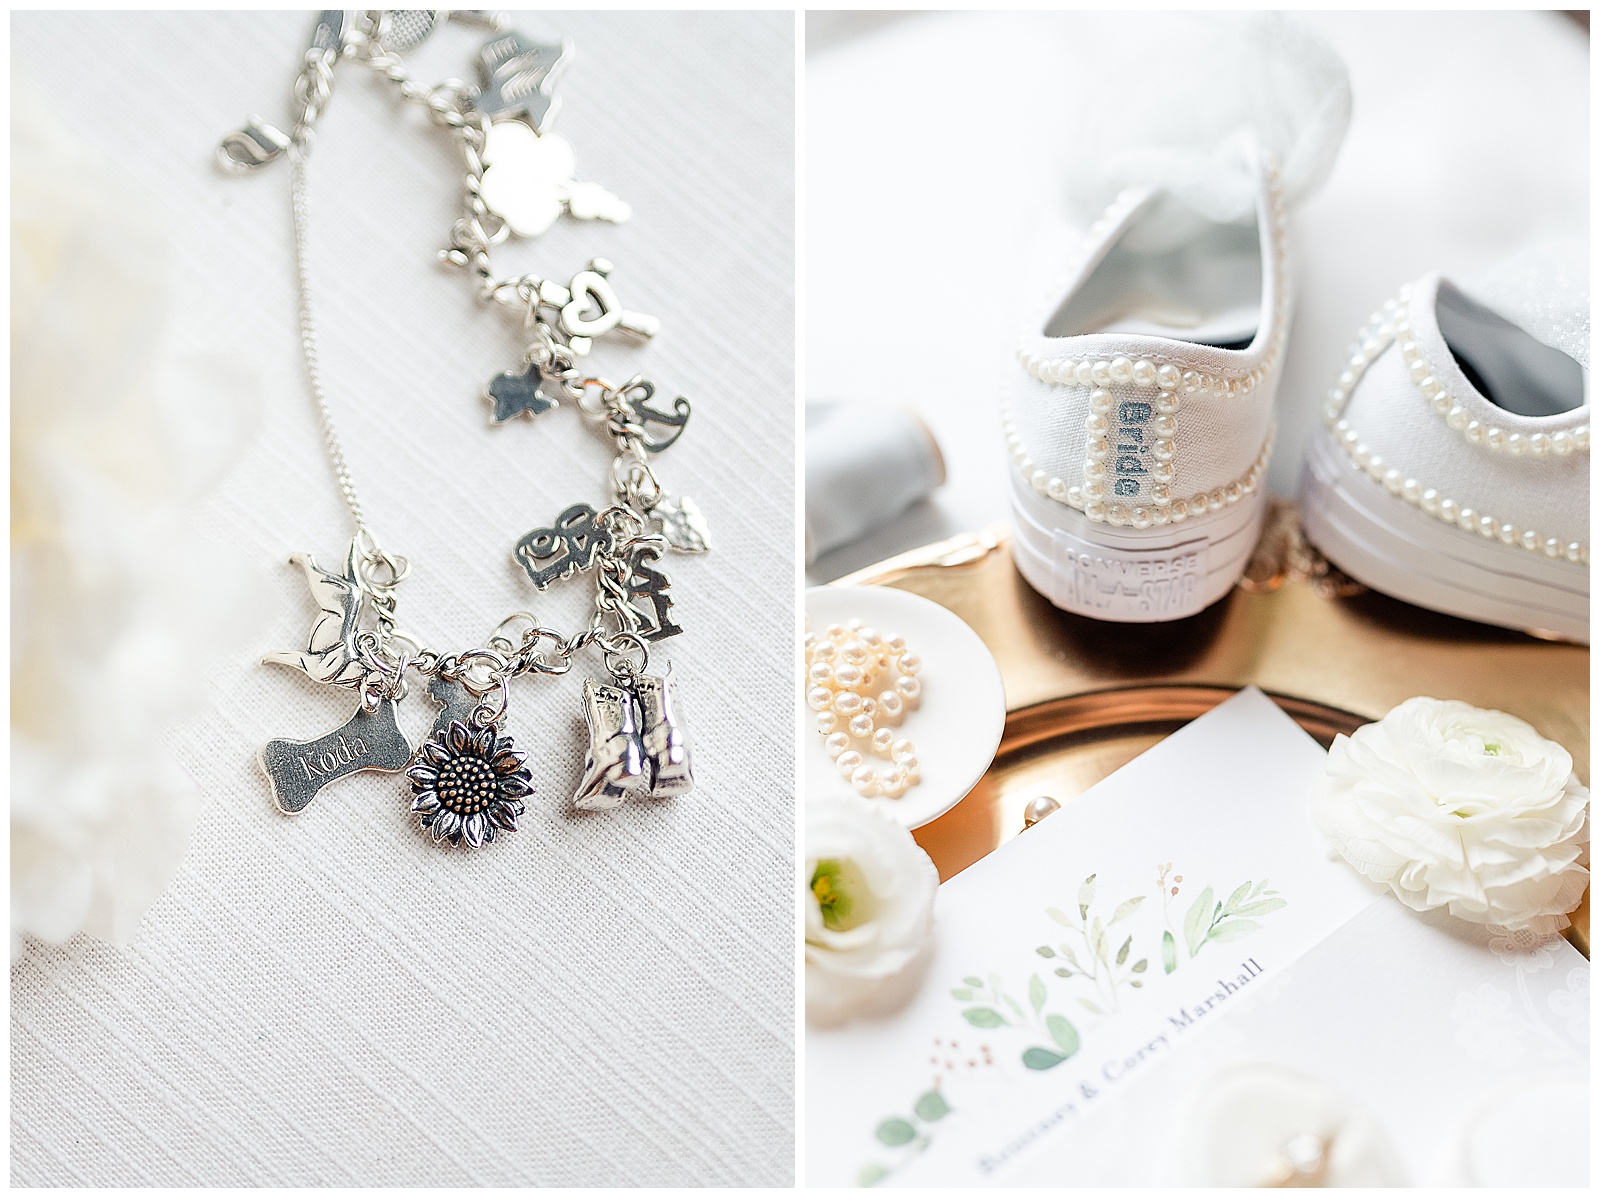 The brides charm bracelet and converse bridal shoes with pearls